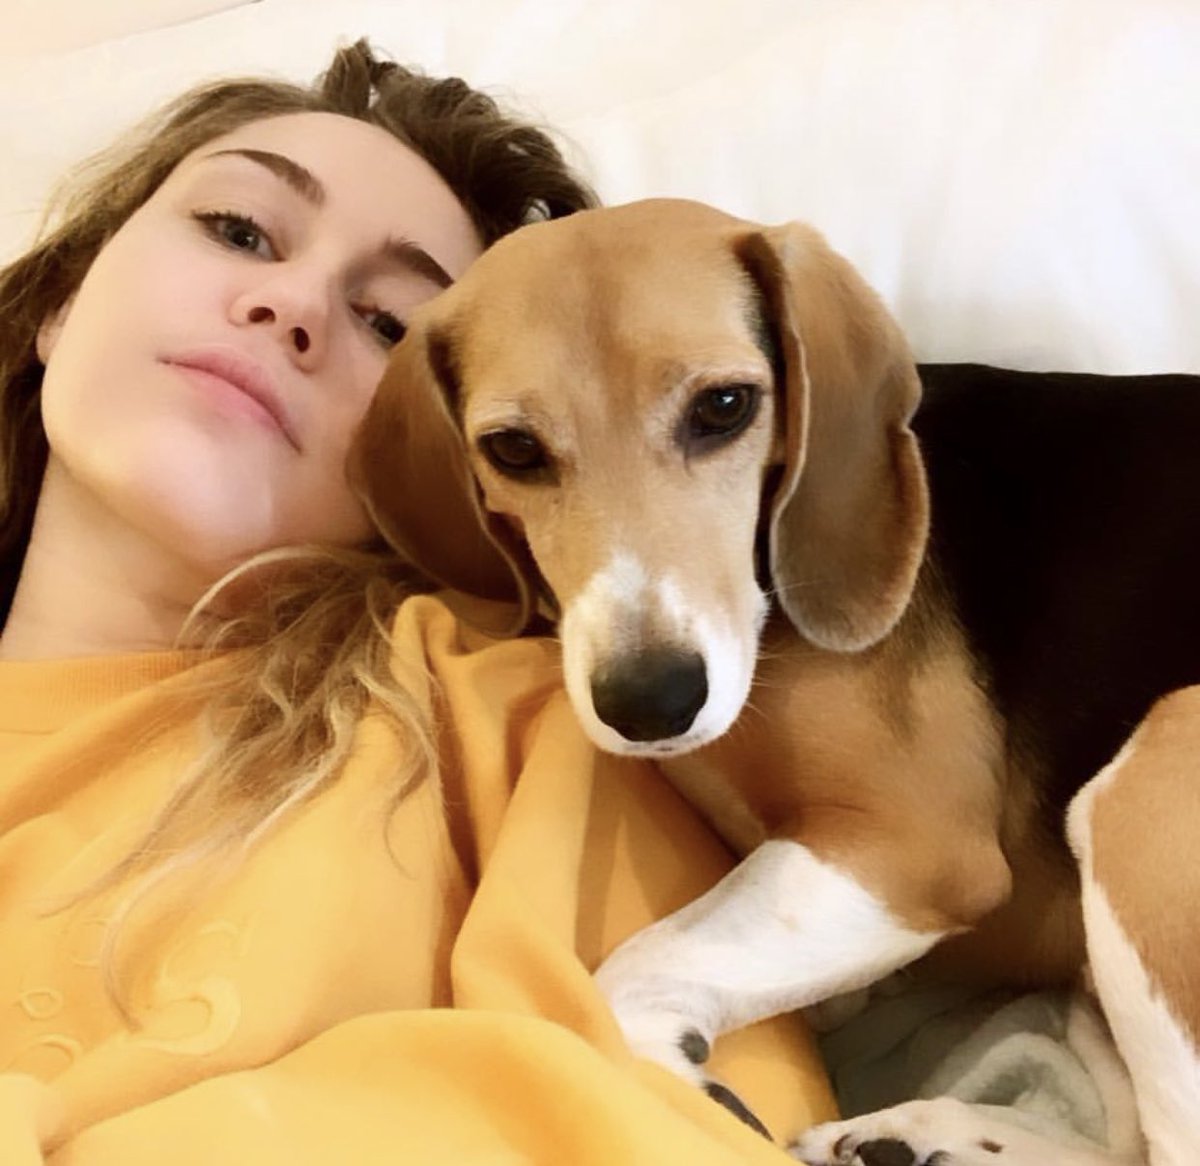 Miley Cyrus taking a selfie while lying on her bed next to her Beagle